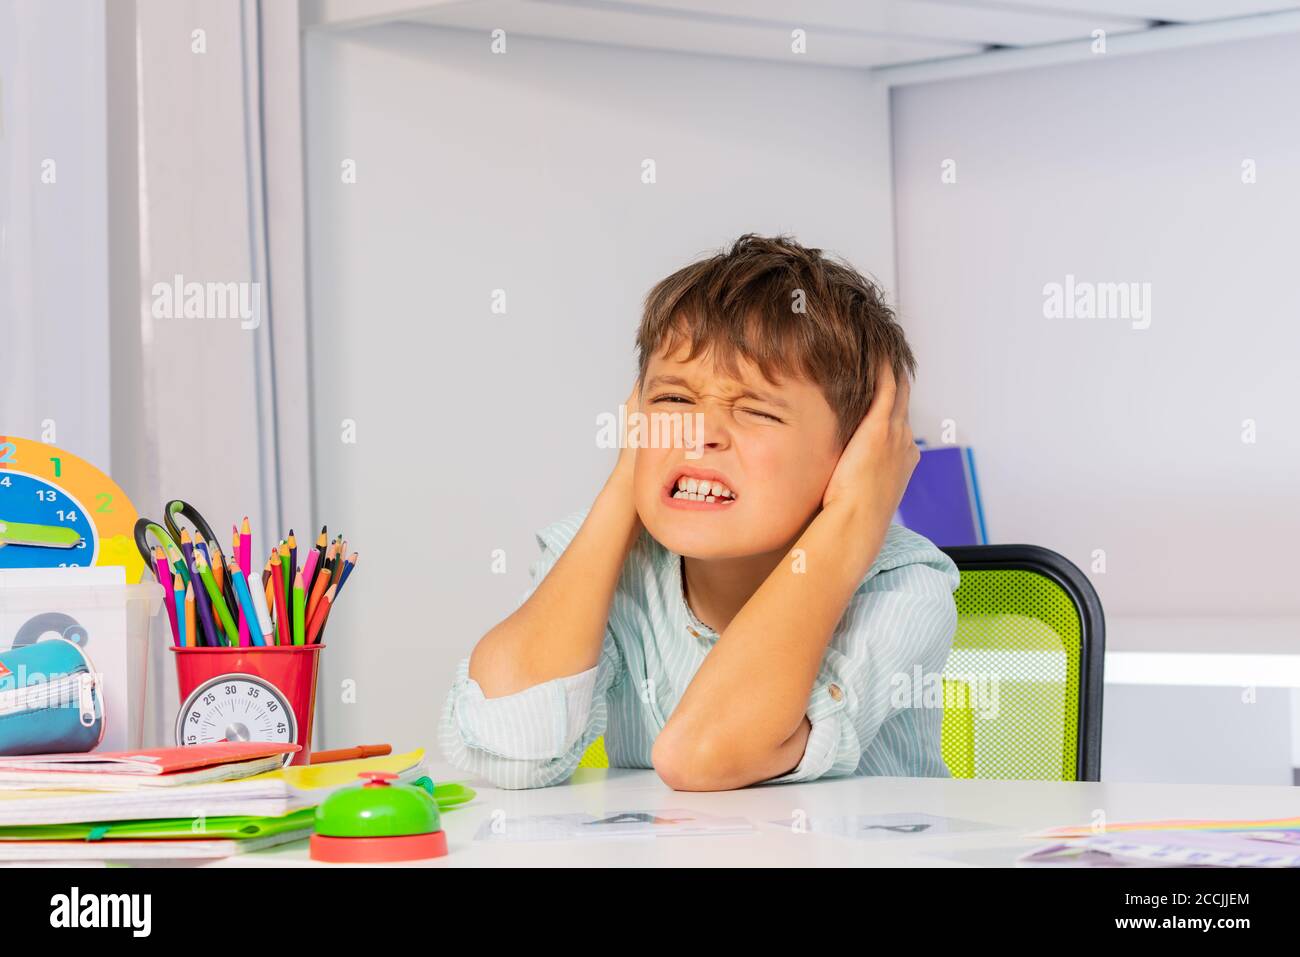 Screaming sad boy with autistic disorder cover ears and grin during development therapy class lesson Stock Photo